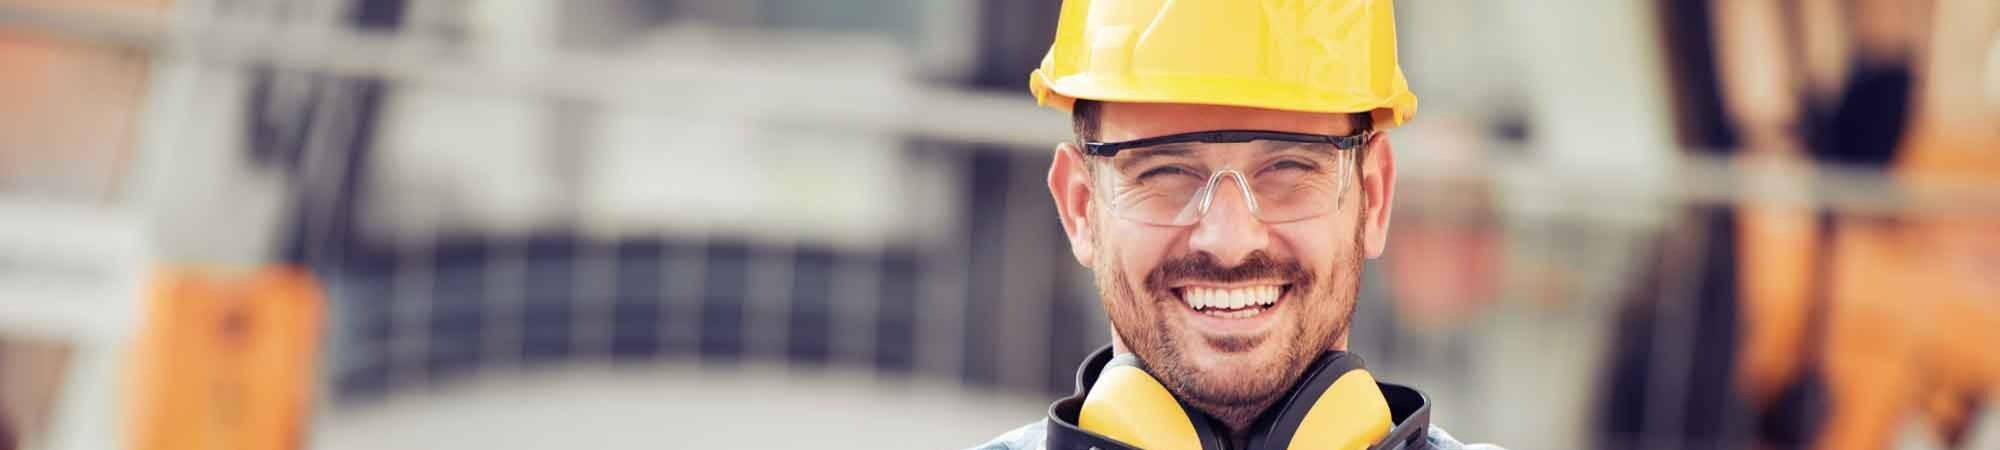 smiling man on construction site